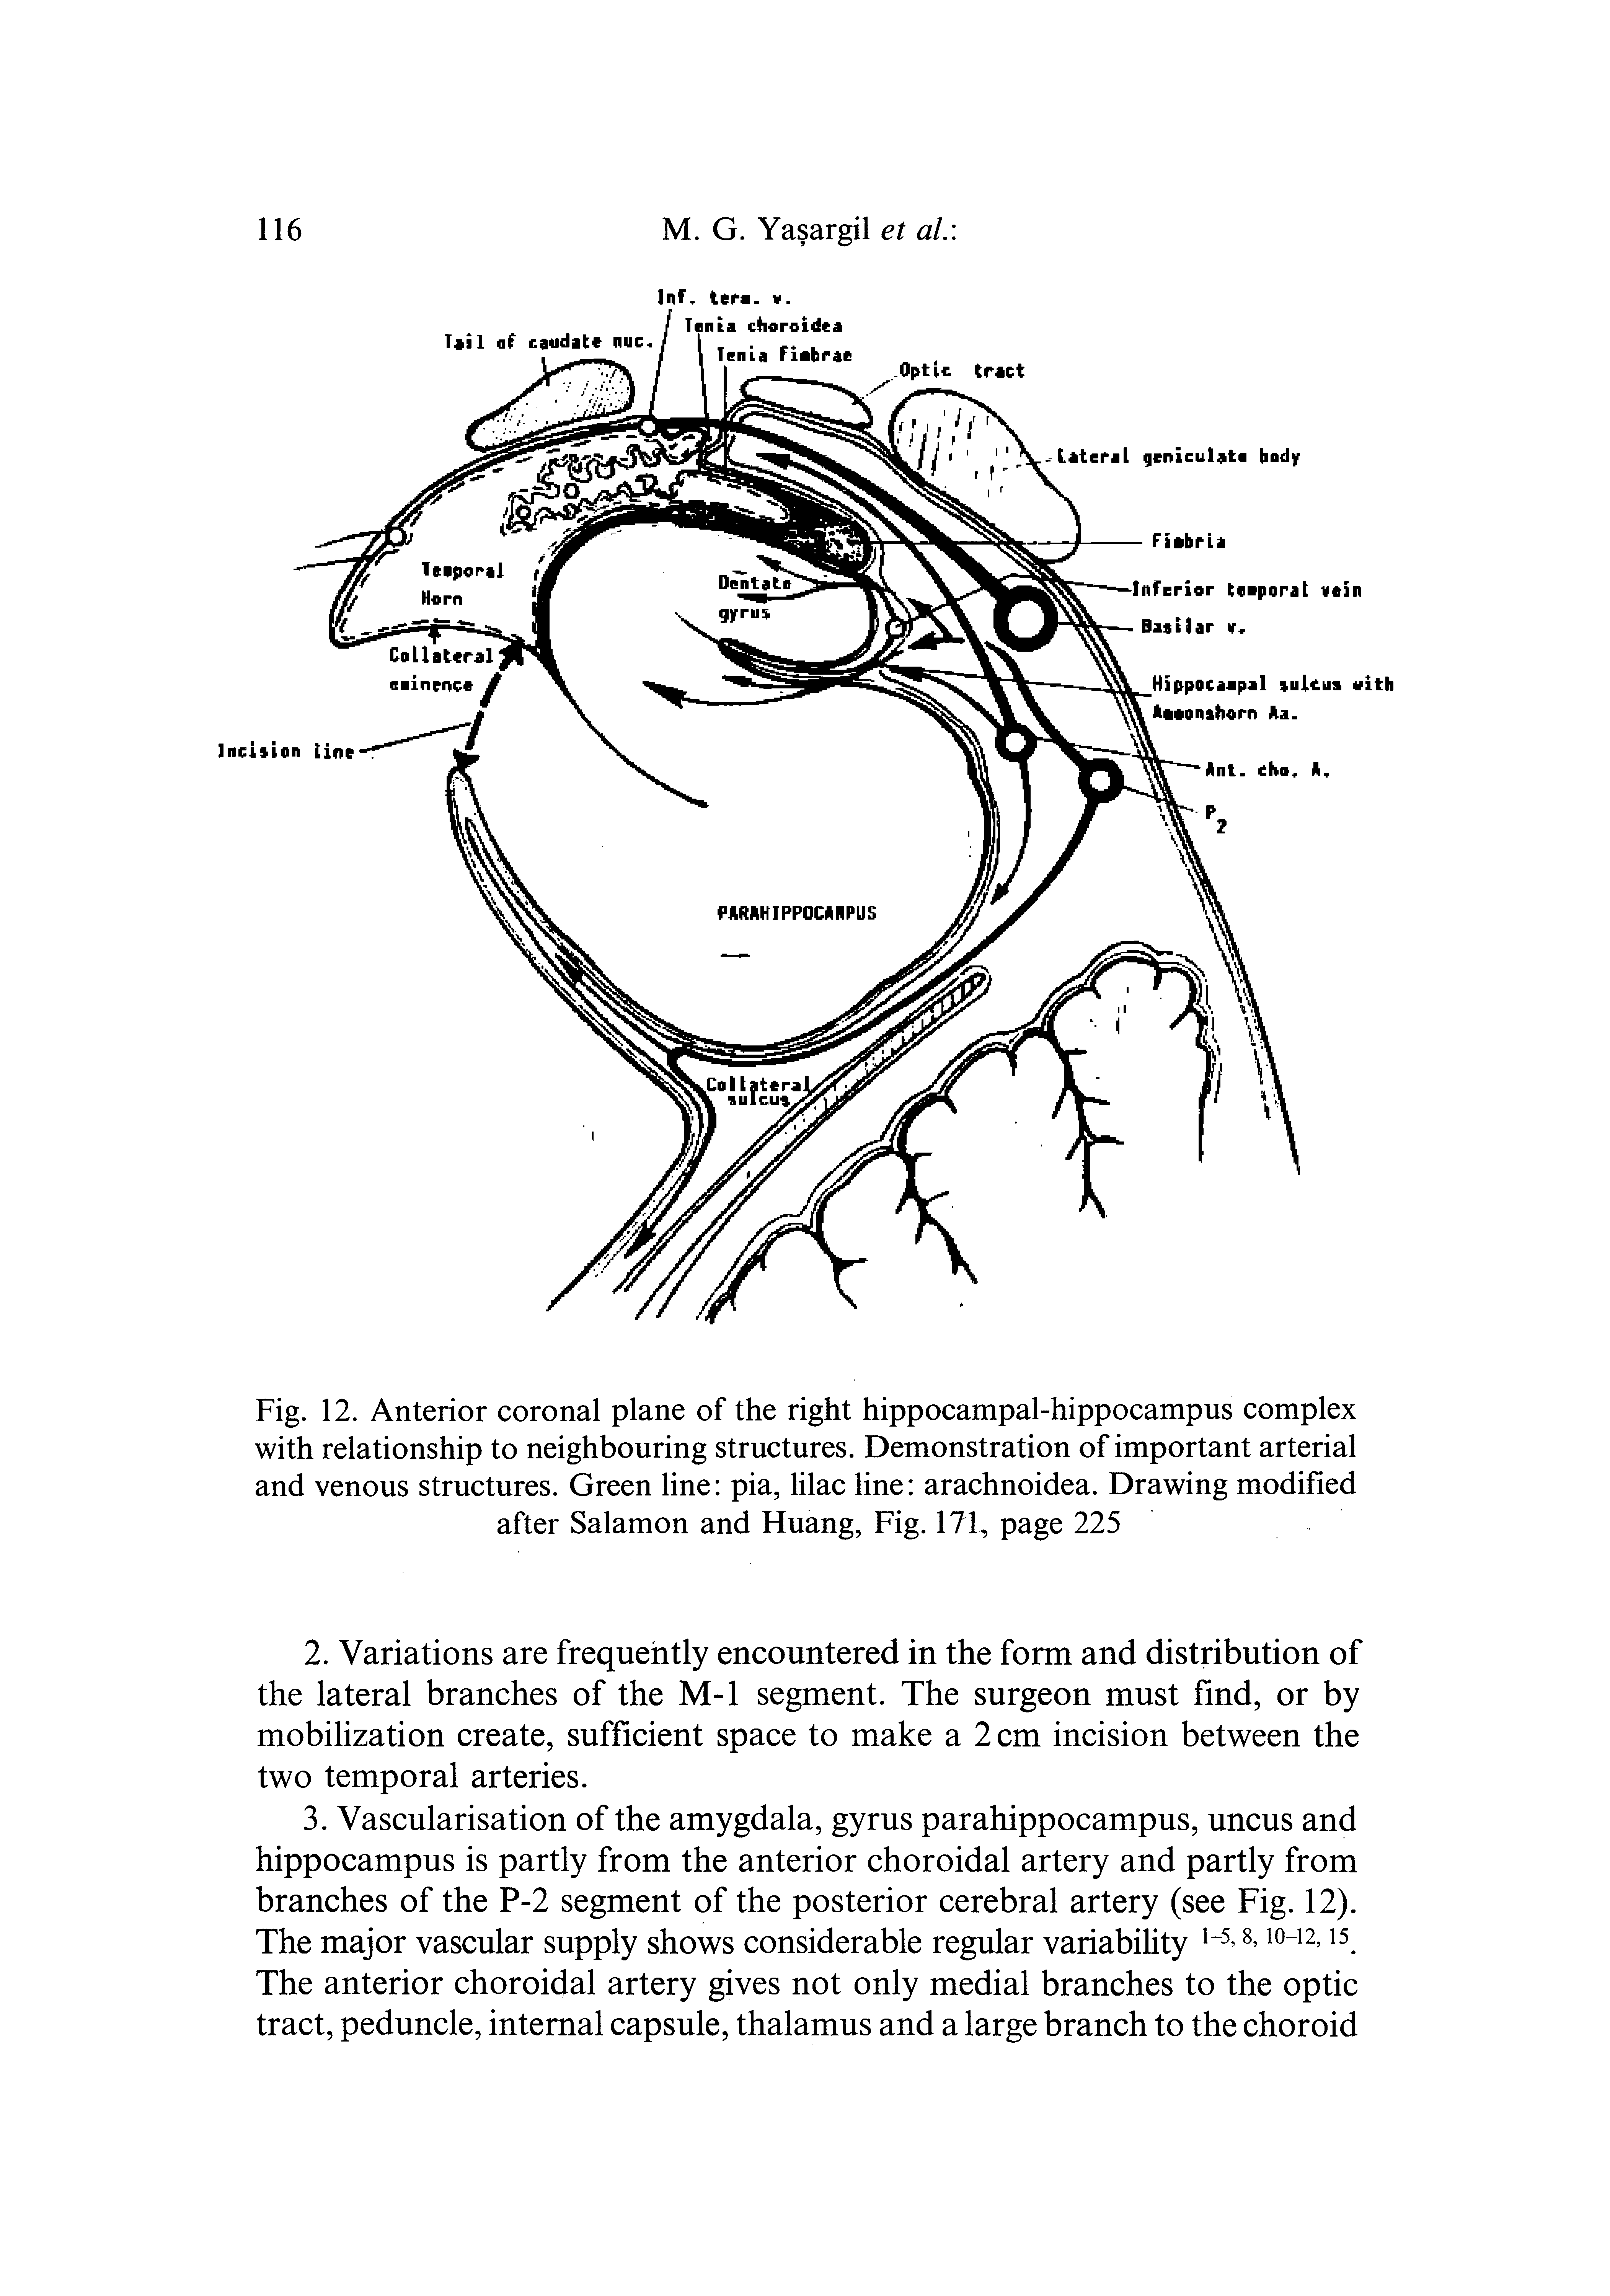 Fig. 12. Anterior coronal plane of the right hippocampal-hippocampus complex with relationship to neighbouring structures. Demonstration of important arterial and venous structures. Green line pia, hlac line arachnoidea. Drawing modified after Salamon and Huang, Fig. 171, page 225...